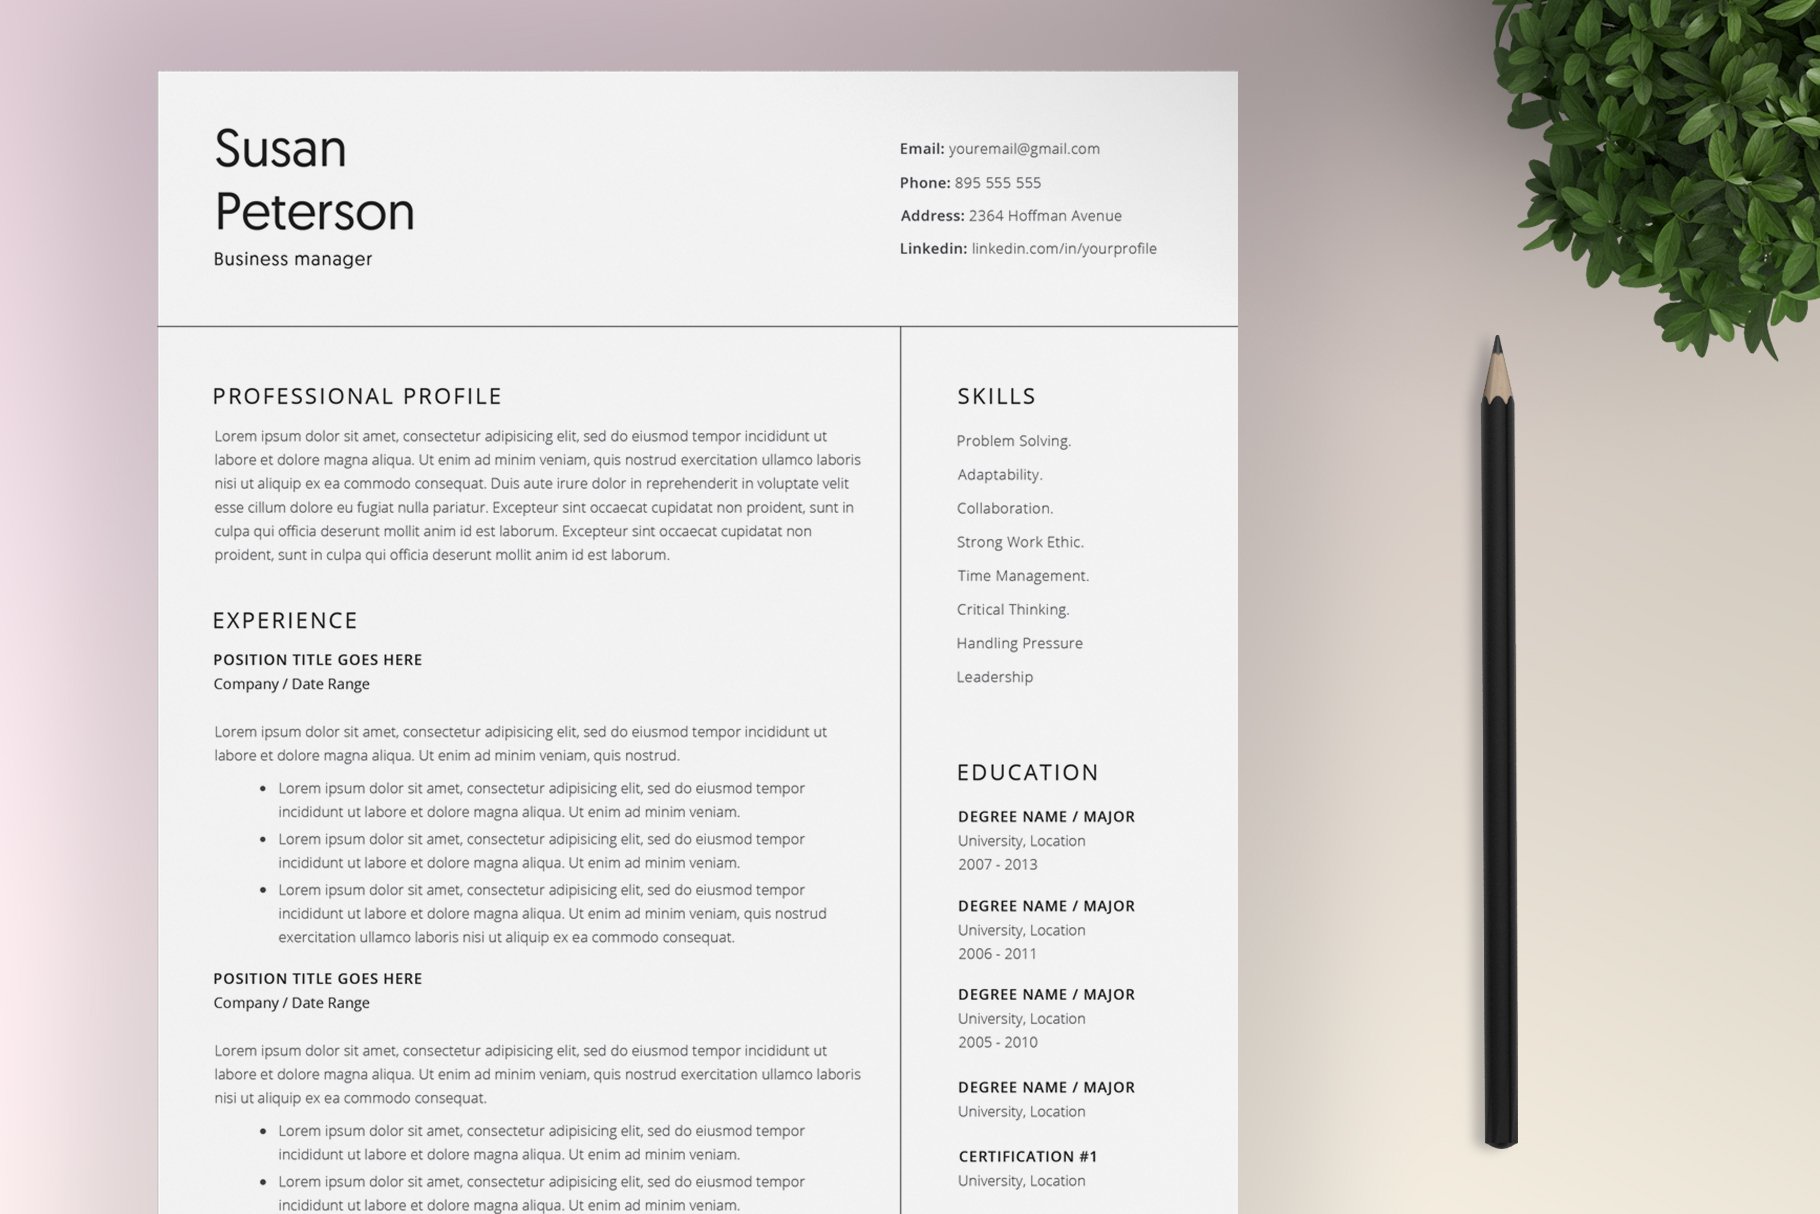 Resume | Cover Letter | 4 Pages cover image.